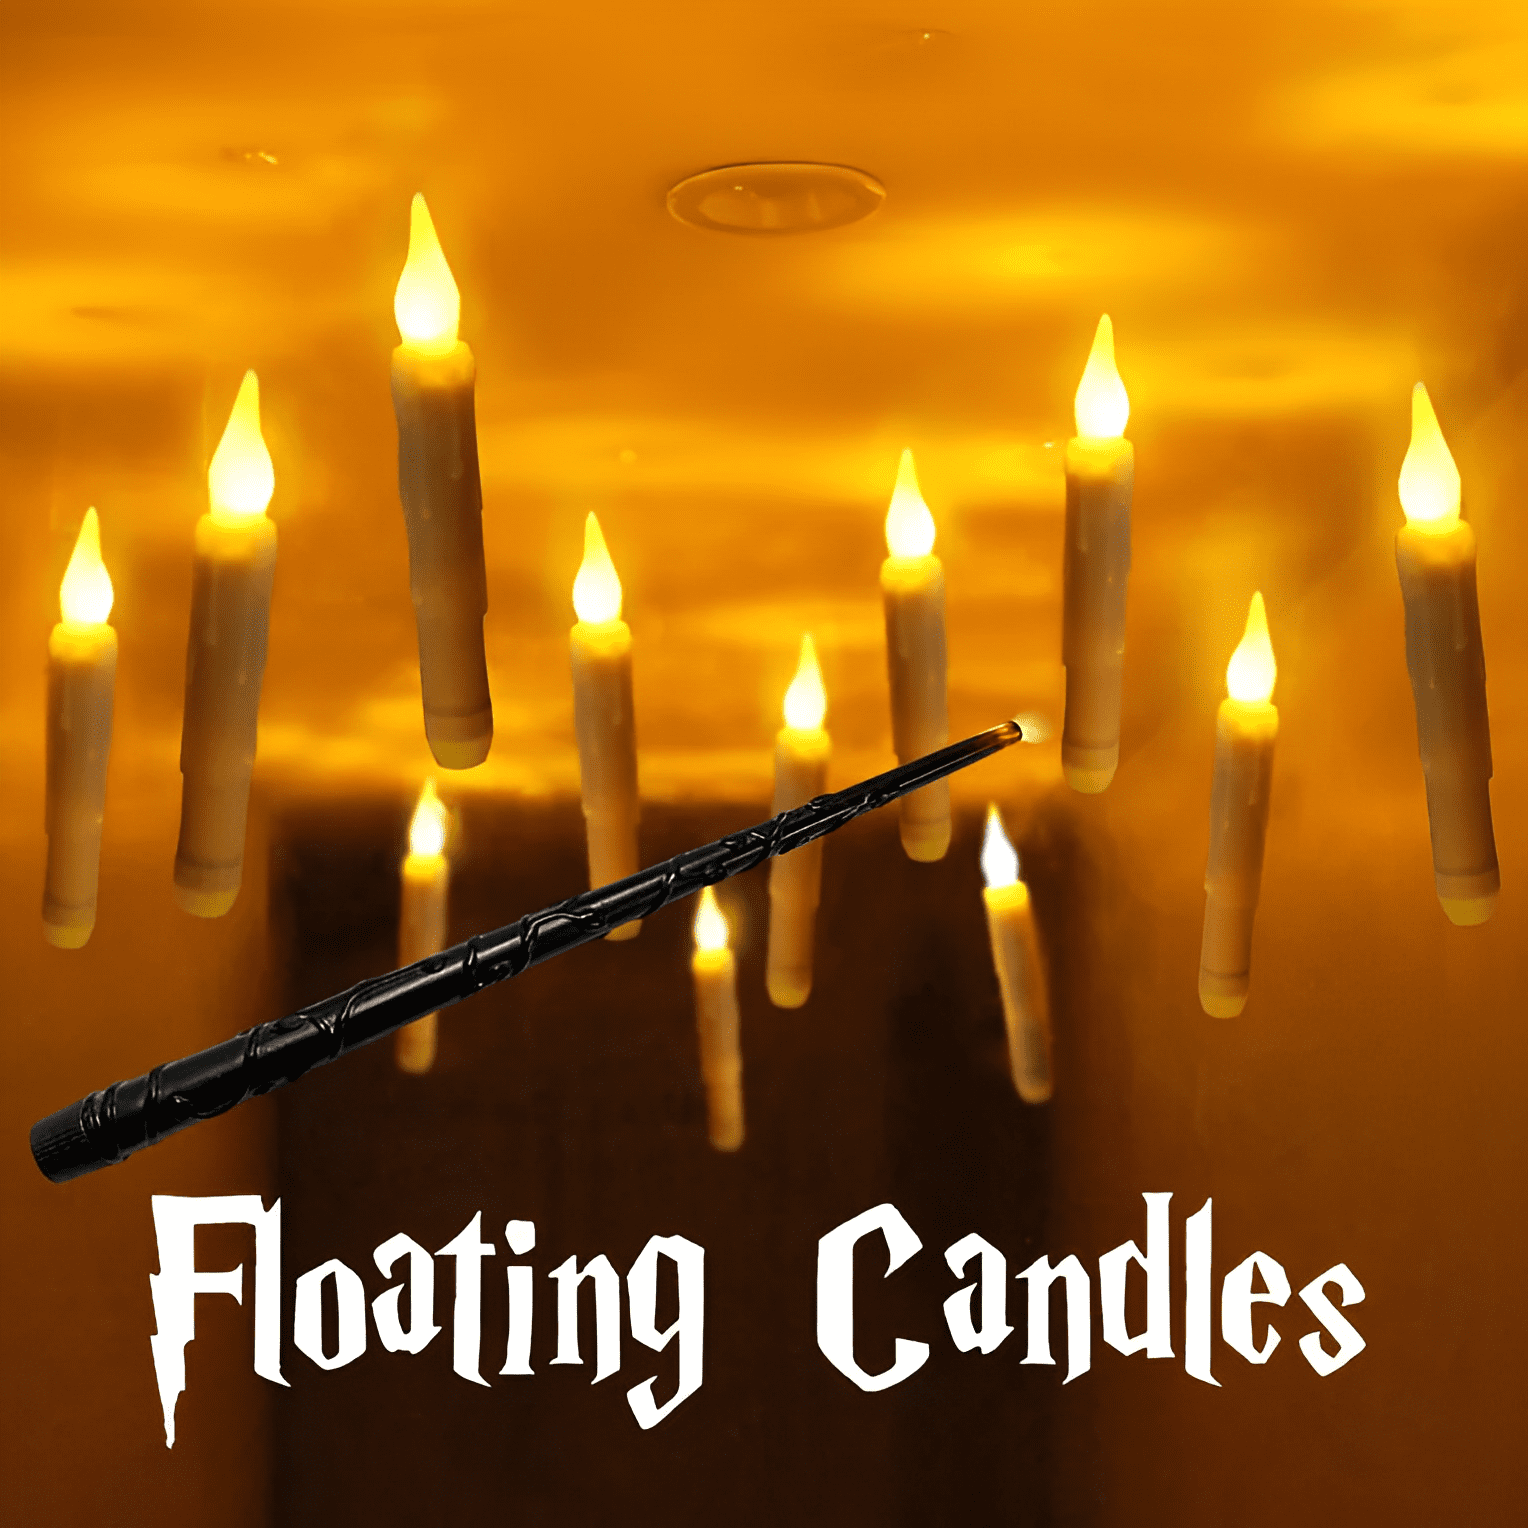 Have you seen our new floating candles with a wand remote control 😱 Us  Harry Potter fans are geeking out!, By The Tree Barn, Christmas Common